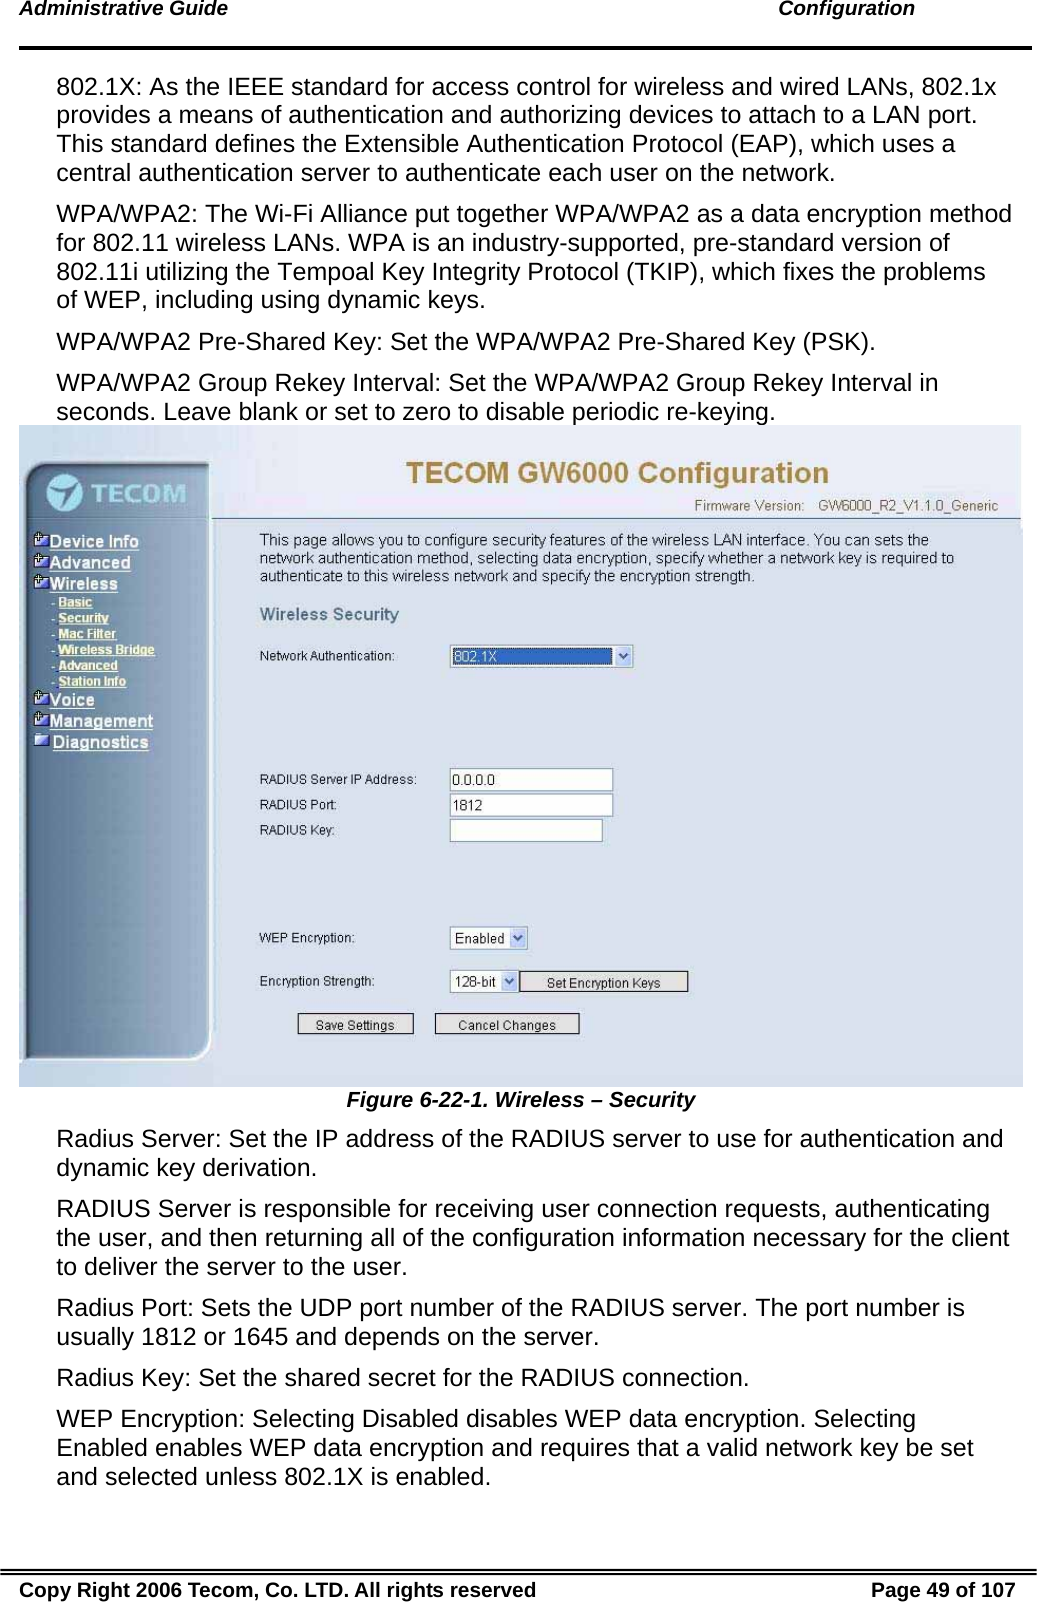 Administrative Guide                                                                                               Configuration 802.1X: As the IEEE standard for access control for wireless and wired LANs, 802.1x provides a means of authentication and authorizing devices to attach to a LAN port. This standard defines the Extensible Authentication Protocol (EAP), which uses a central authentication server to authenticate each user on the network. WPA/WPA2: The Wi-Fi Alliance put together WPA/WPA2 as a data encryption method for 802.11 wireless LANs. WPA is an industry-supported, pre-standard version of 802.11i utilizing the Tempoal Key Integrity Protocol (TKIP), which fixes the problems of WEP, including using dynamic keys. WPA/WPA2 Pre-Shared Key: Set the WPA/WPA2 Pre-Shared Key (PSK). WPA/WPA2 Group Rekey Interval: Set the WPA/WPA2 Group Rekey Interval in seconds. Leave blank or set to zero to disable periodic re-keying.  Figure 6-22-1. Wireless – Security Radius Server: Set the IP address of the RADIUS server to use for authentication and dynamic key derivation. RADIUS Server is responsible for receiving user connection requests, authenticating the user, and then returning all of the configuration information necessary for the client to deliver the server to the user. Radius Port: Sets the UDP port number of the RADIUS server. The port number is usually 1812 or 1645 and depends on the server. Radius Key: Set the shared secret for the RADIUS connection. WEP Encryption: Selecting Disabled disables WEP data encryption. Selecting Enabled enables WEP data encryption and requires that a valid network key be set and selected unless 802.1X is enabled. Copy Right 2006 Tecom, Co. LTD. All rights reserved  Page 49 of 107 